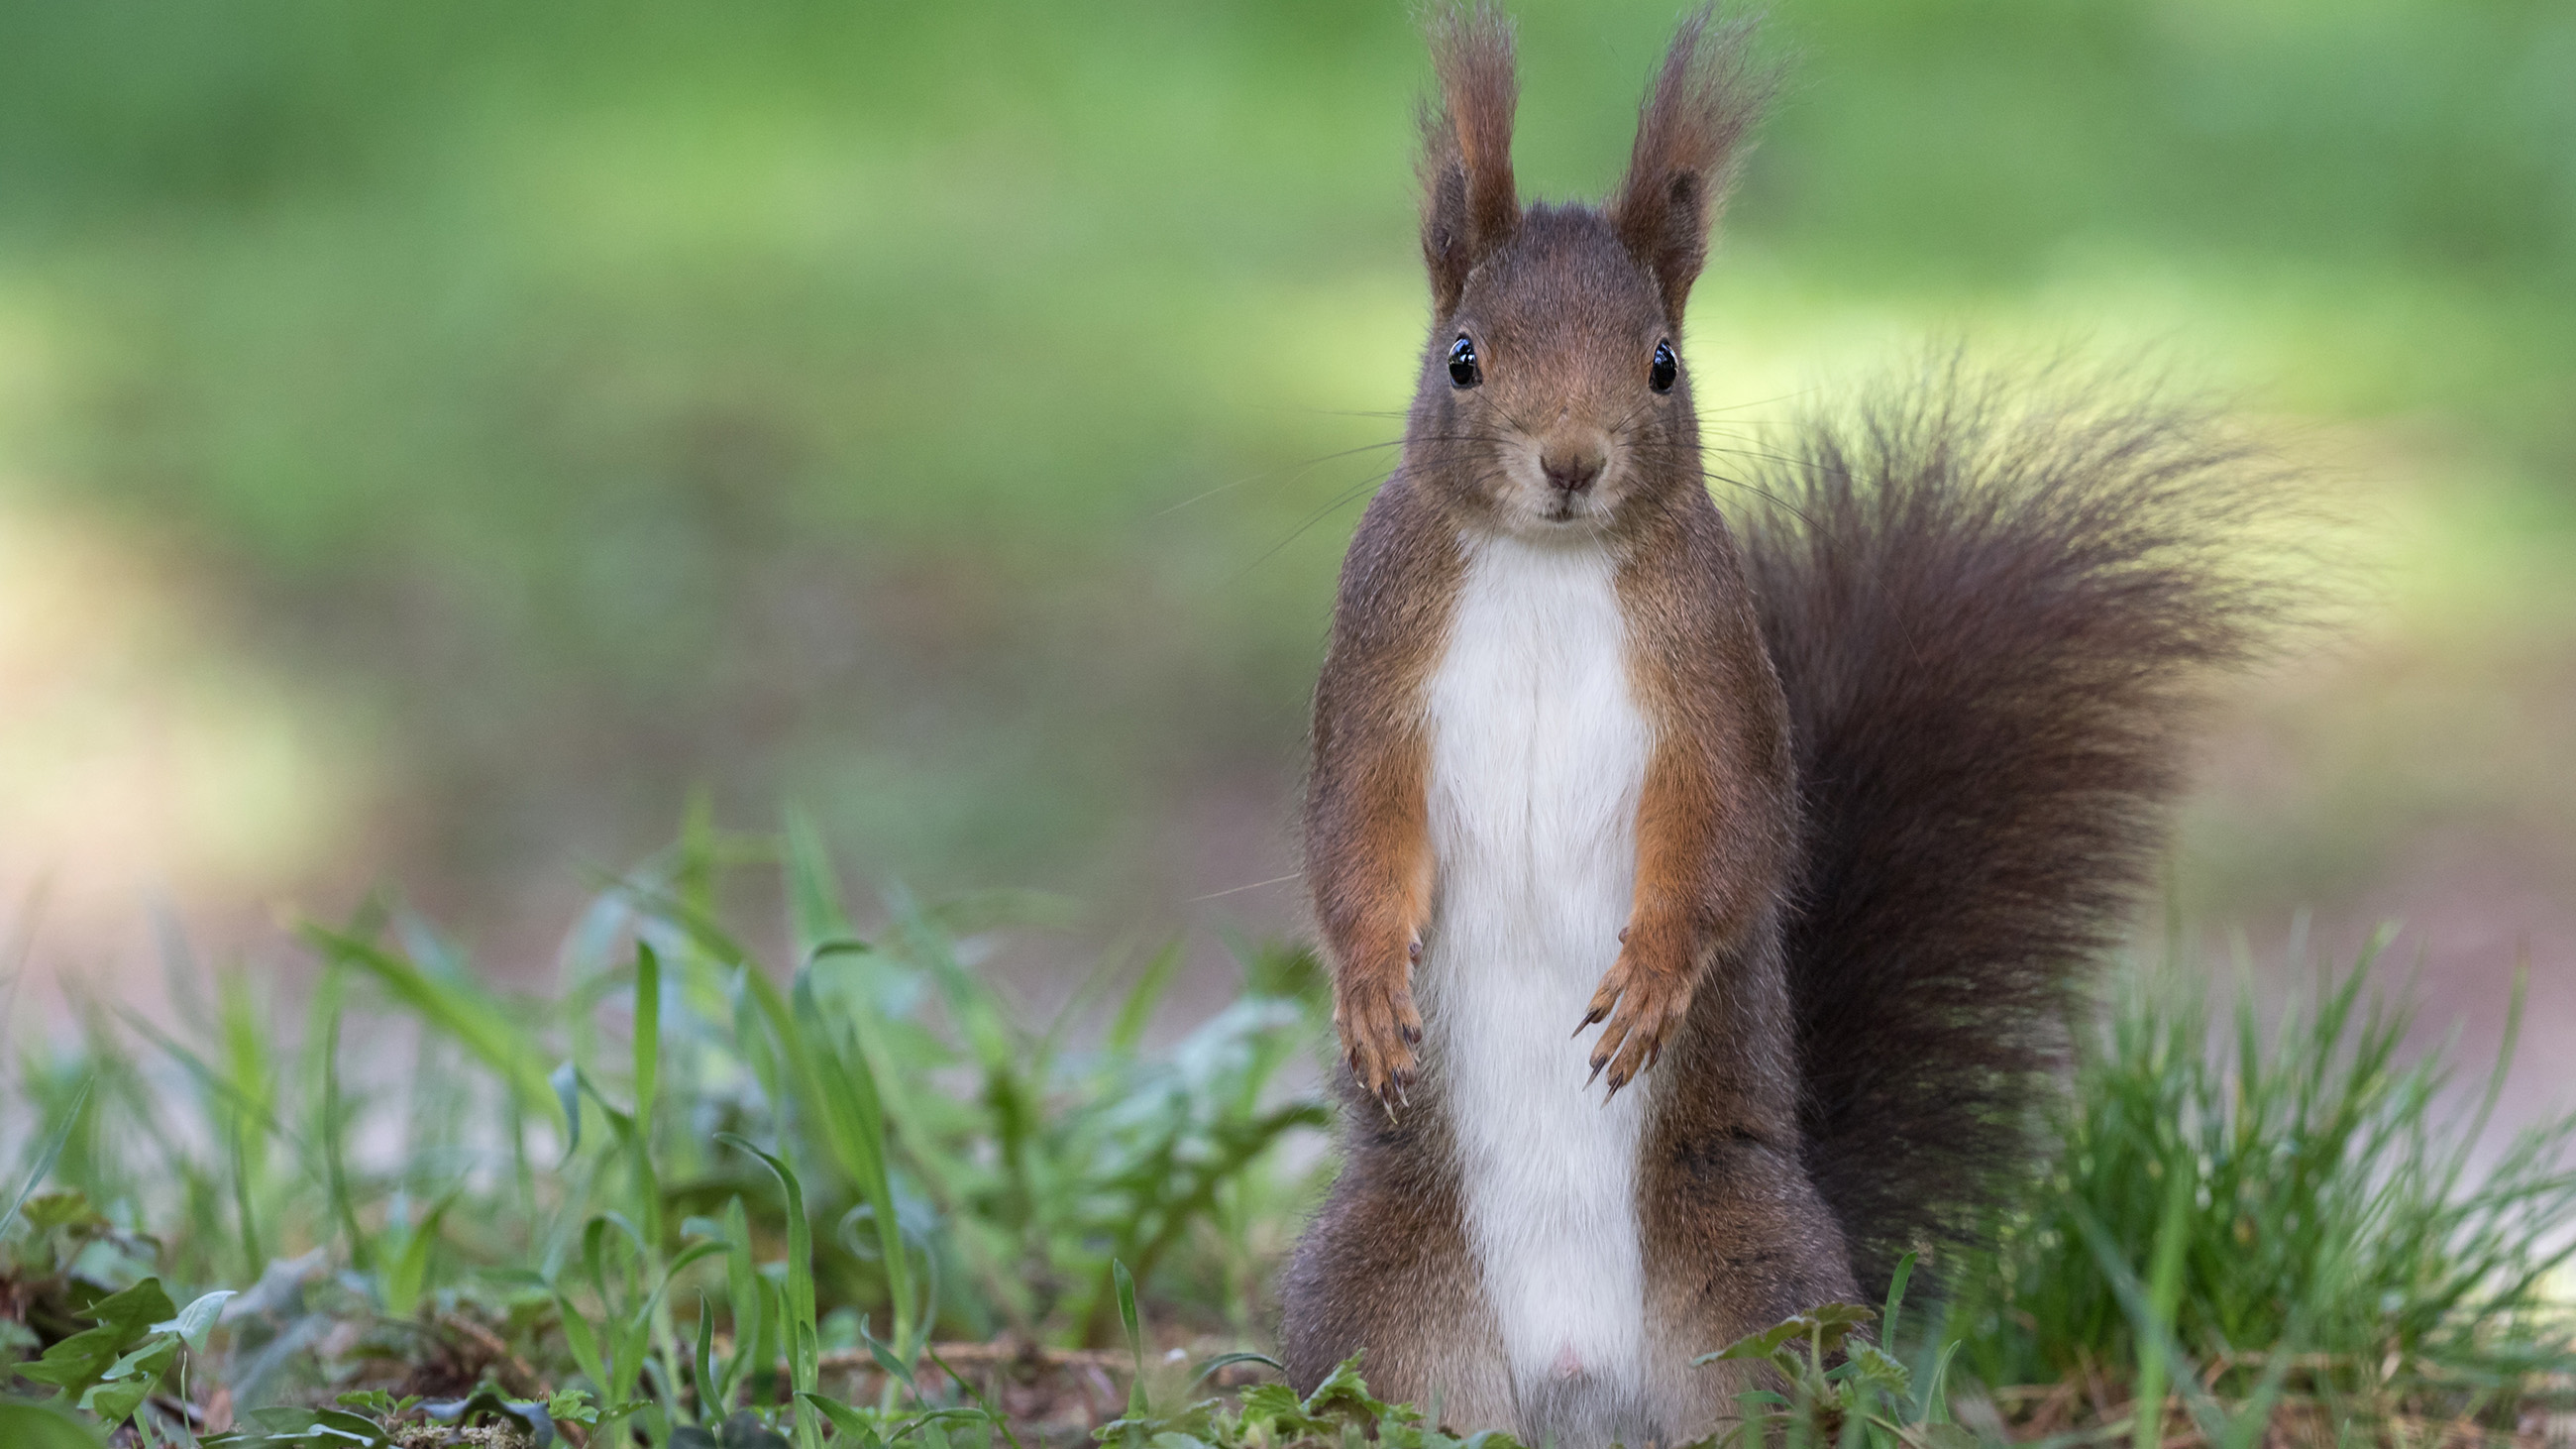 Based on recent evidence, scientists now think red squirrels across England, Ireland, and Scotland have been carrying bacteria associated with the leprosy for centuries.